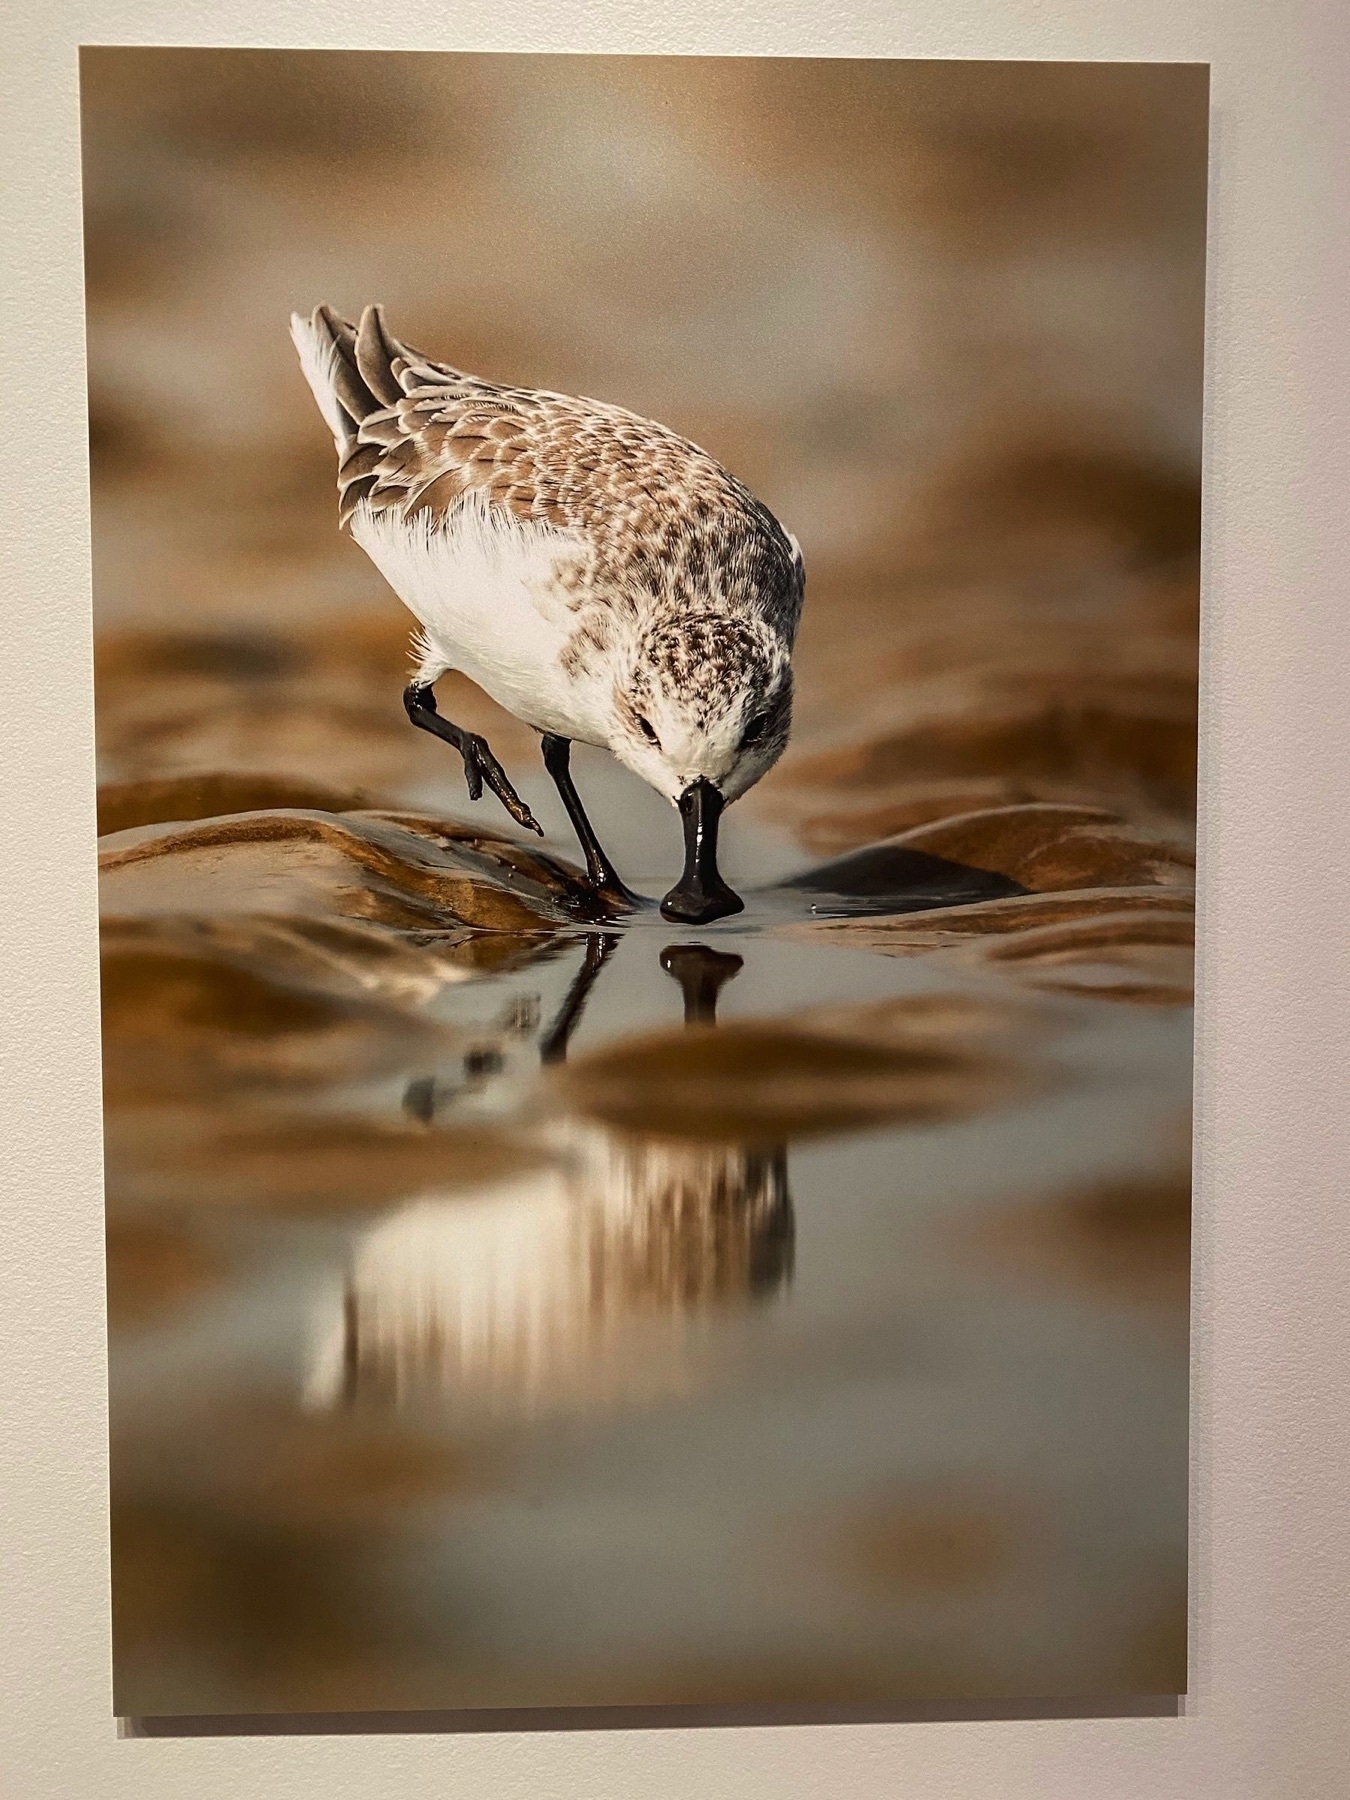 Spoon-billed sandpiper and its reflection. 